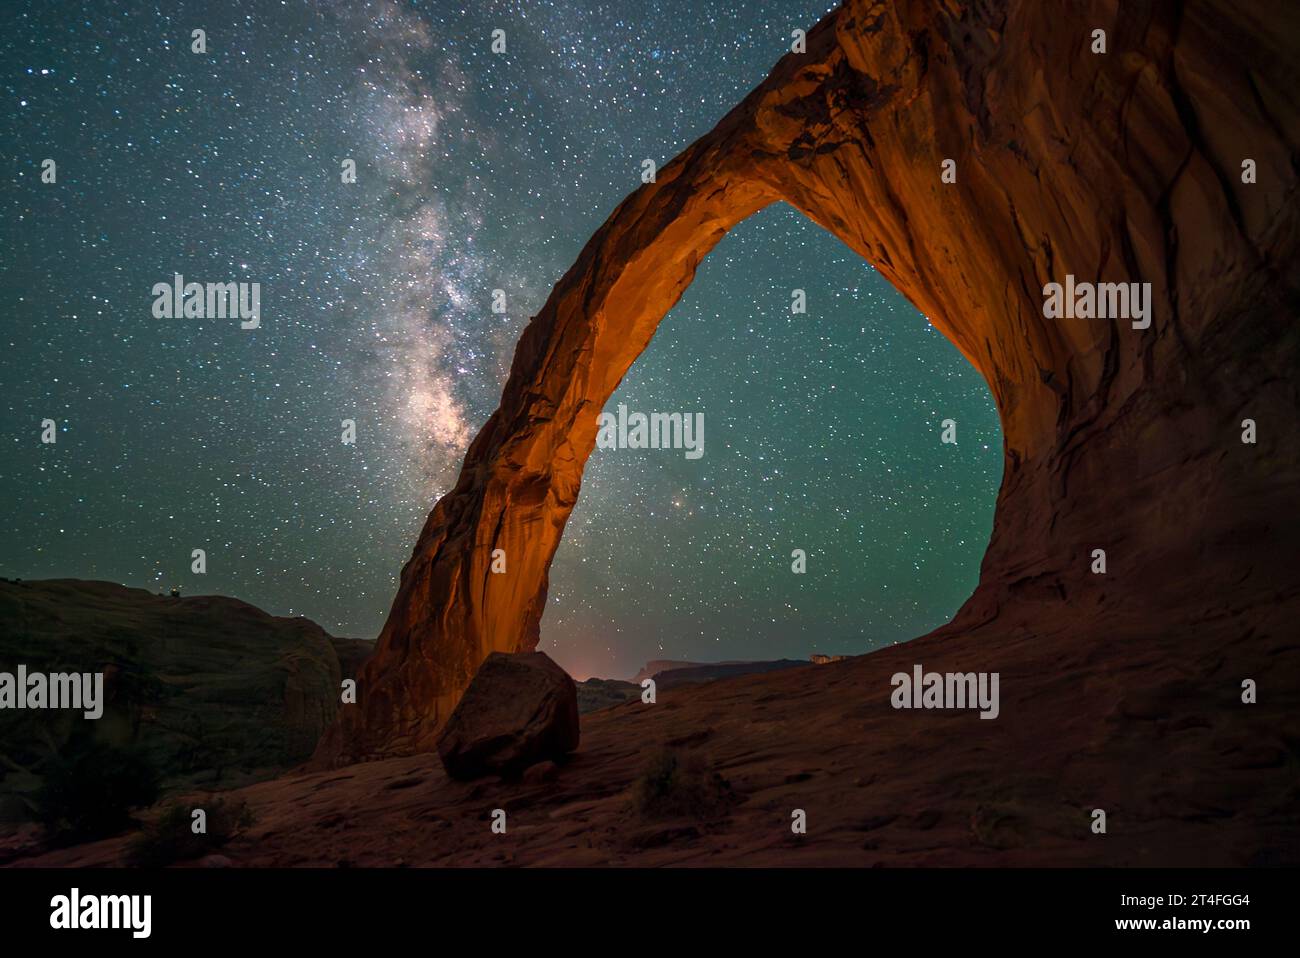 One cannot help but feel awe while taking in a star filled sky in the shadow of the Corona Arch, also known as Little Rainbow Bridge, near Moab, Utah. Stock Photo